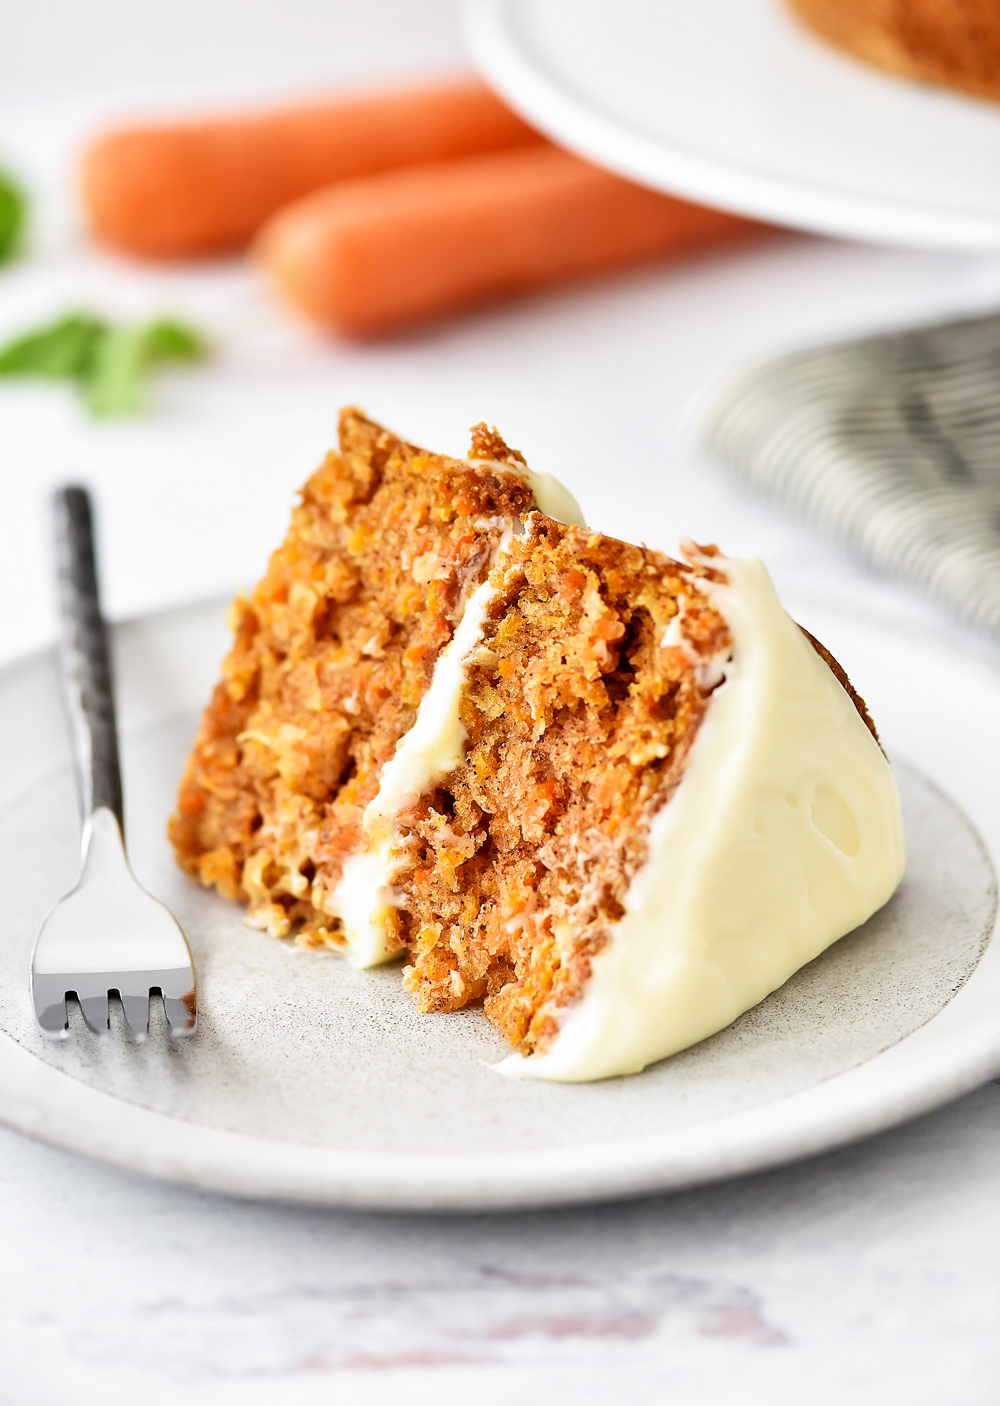 A delicious, moist cake filled with shredded carrots and coconut and topped off with a creamy Almond-Scented Cream Cheese Frosting. Life-in-the-Lofthouse.com